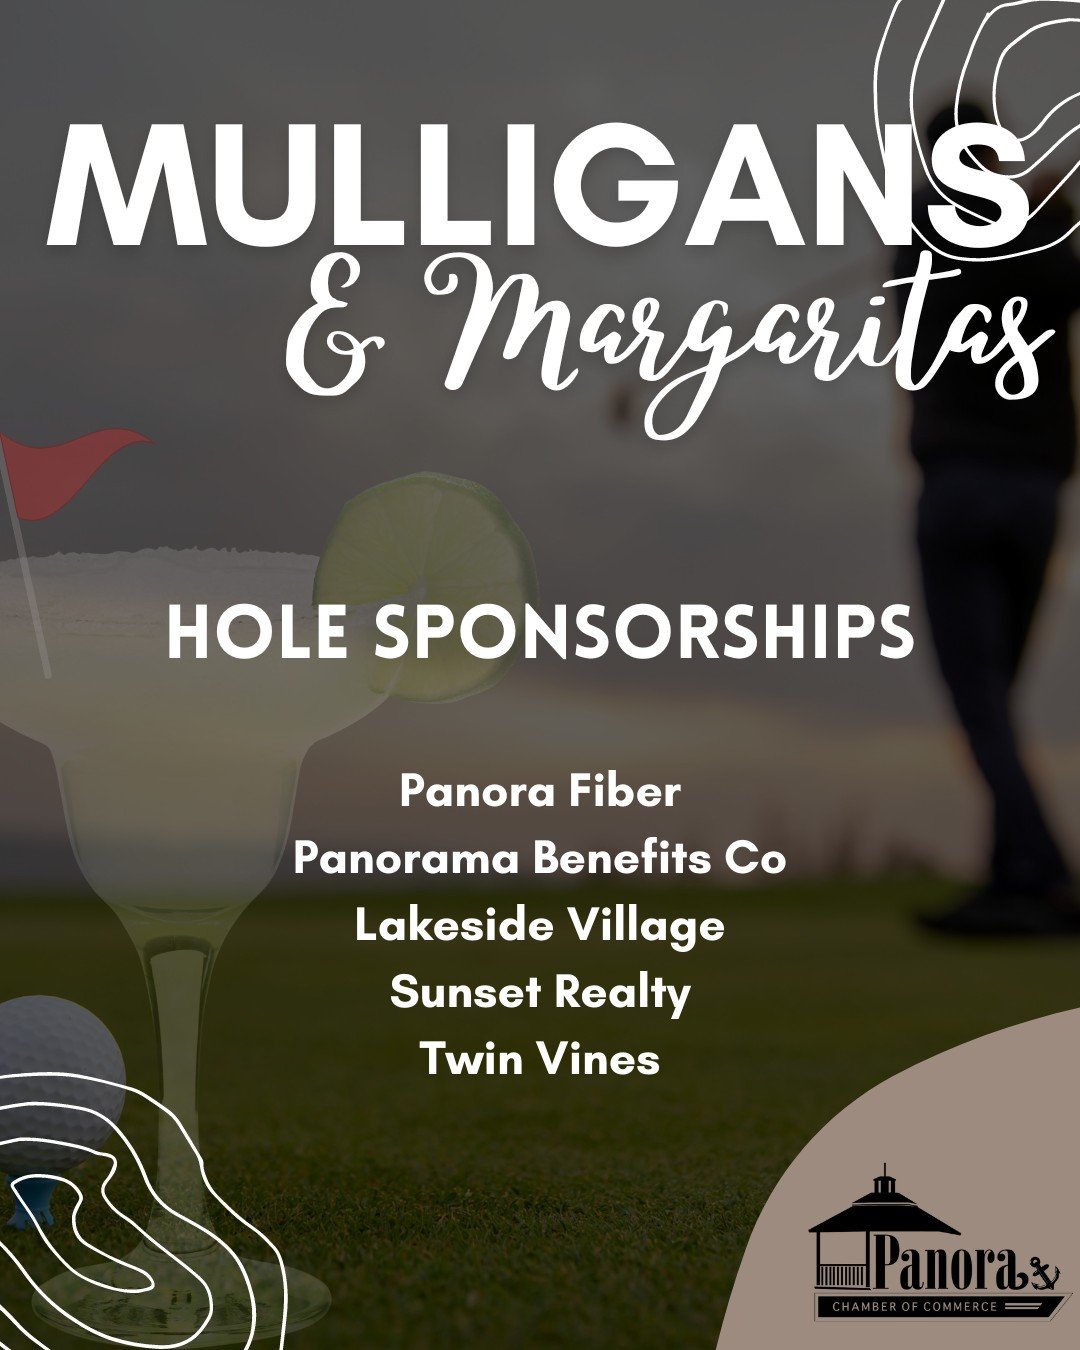 🌟 A Big Thank You To Our Hole Sponsors! 🌟

In anticipation of another fantastic golf tournament, we want to express our heartfelt appreciation to another amazing group of Mulligan and Margarita Hole Sponsors.

Thanks to your support, Panorama Days 